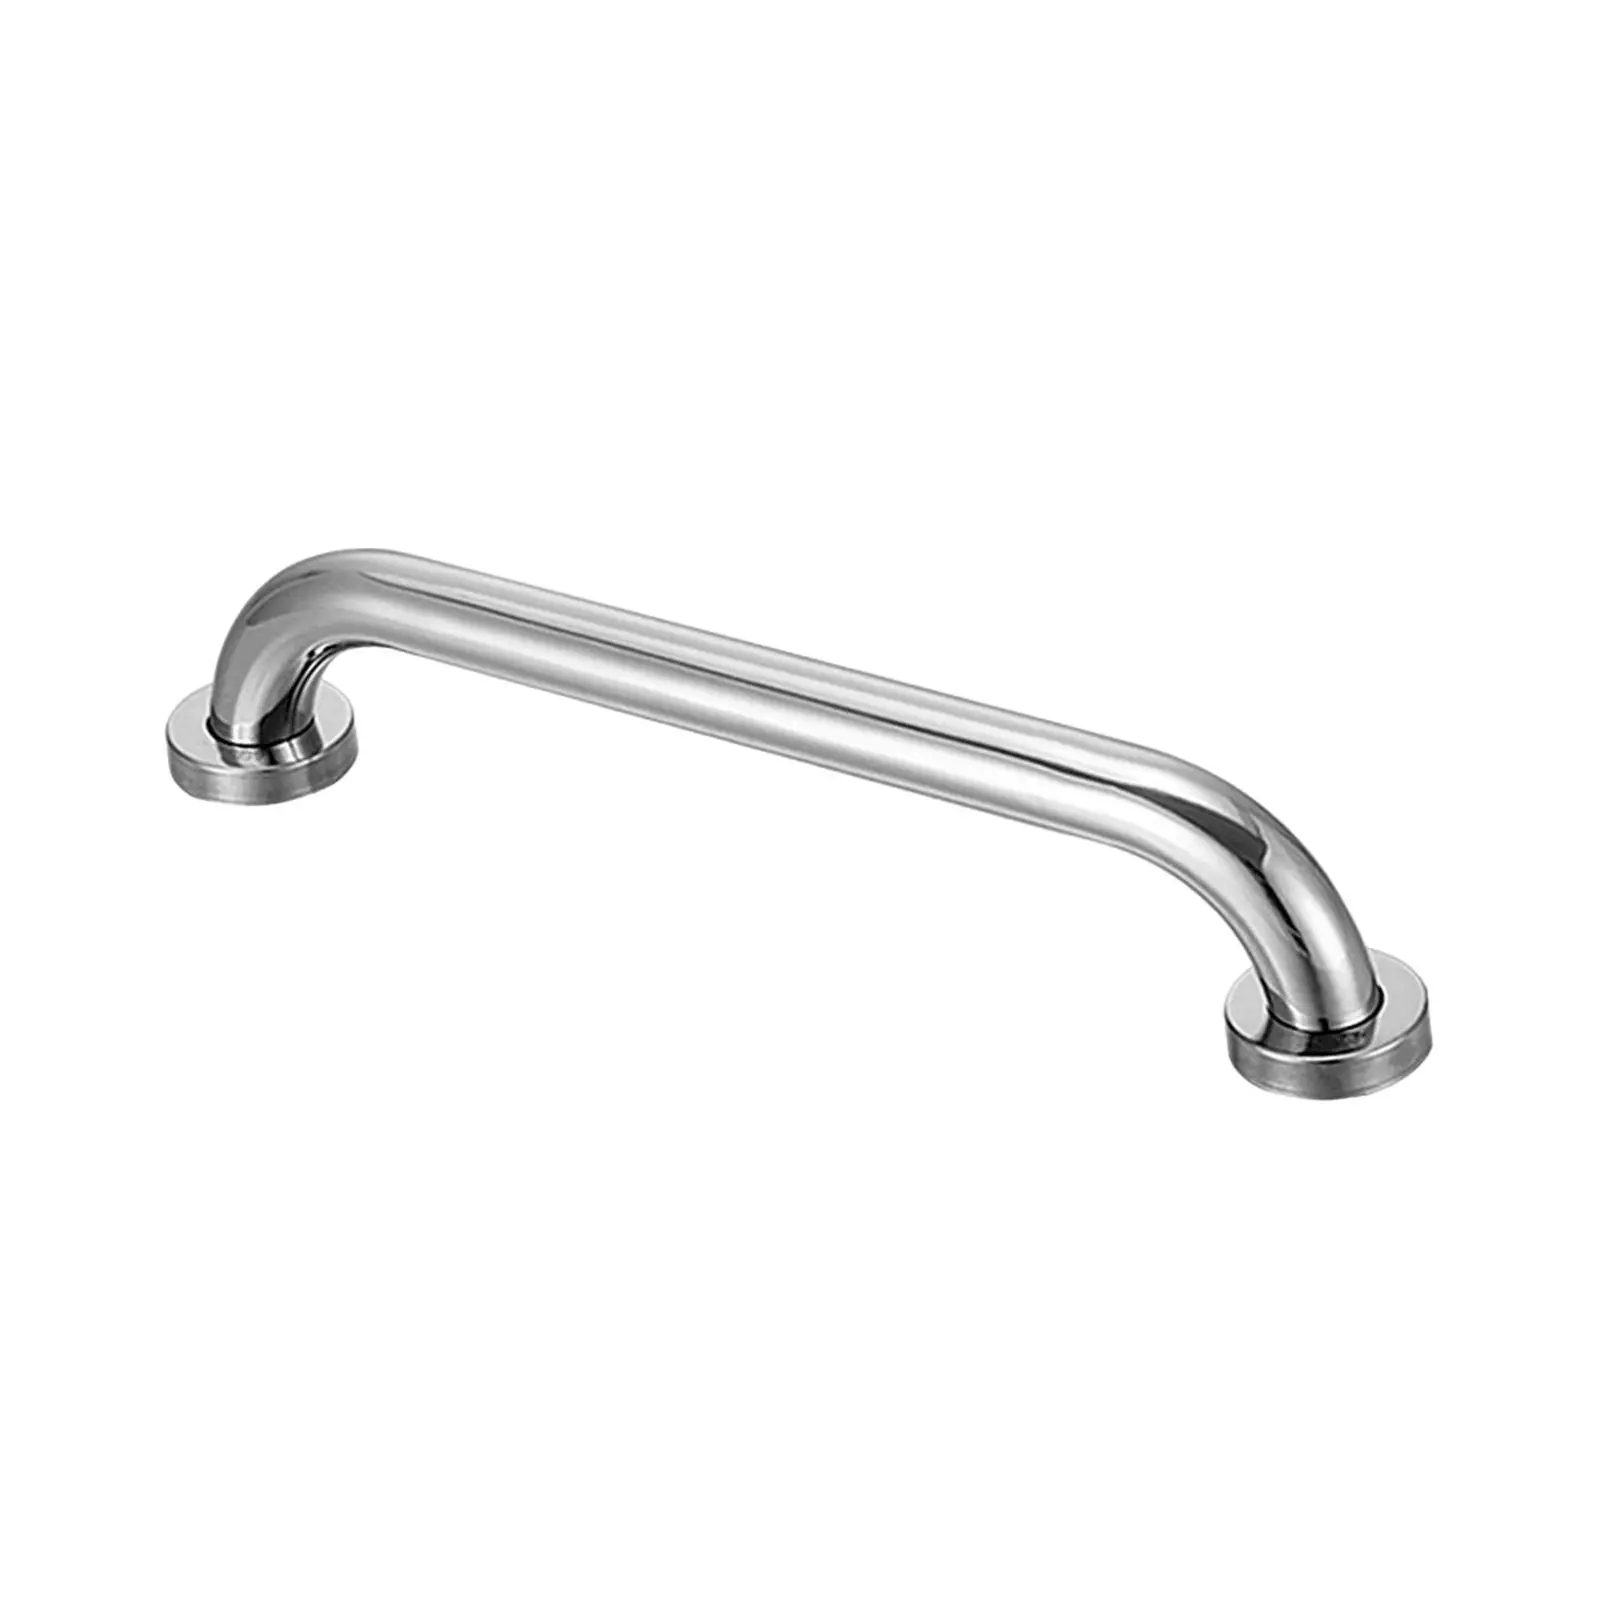 Grab Bar for Bathroom Shower Handle Assist Device Accessories 24inch Stainless Steel Shower Grab Bar for Bath Toilet Tub Seniors